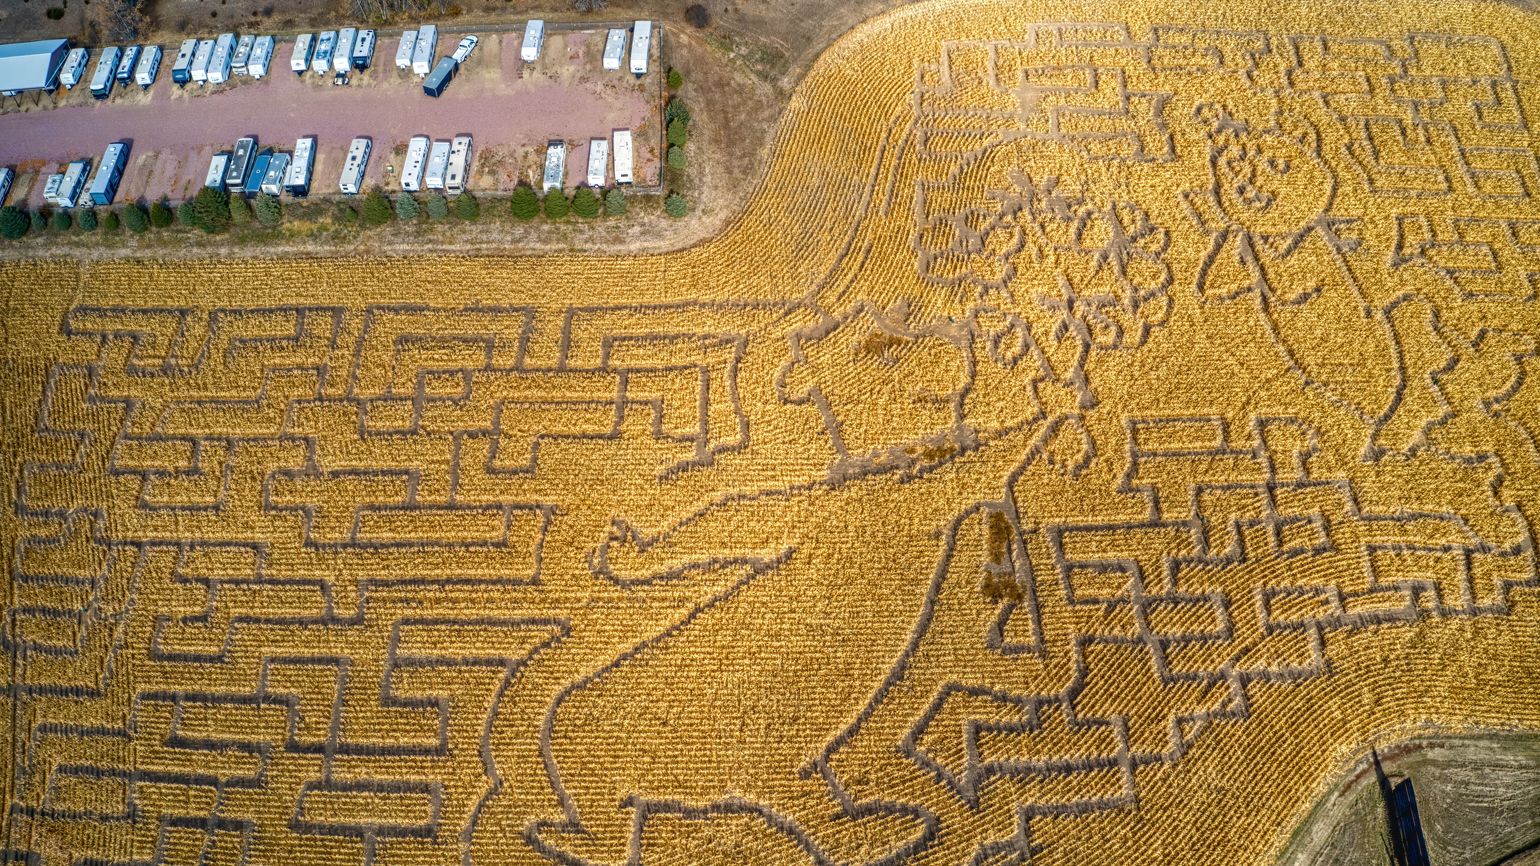 Aerial View of a Corn Maze outside of Sioux Falls, South Dakota. Photo credit: Shutterstock